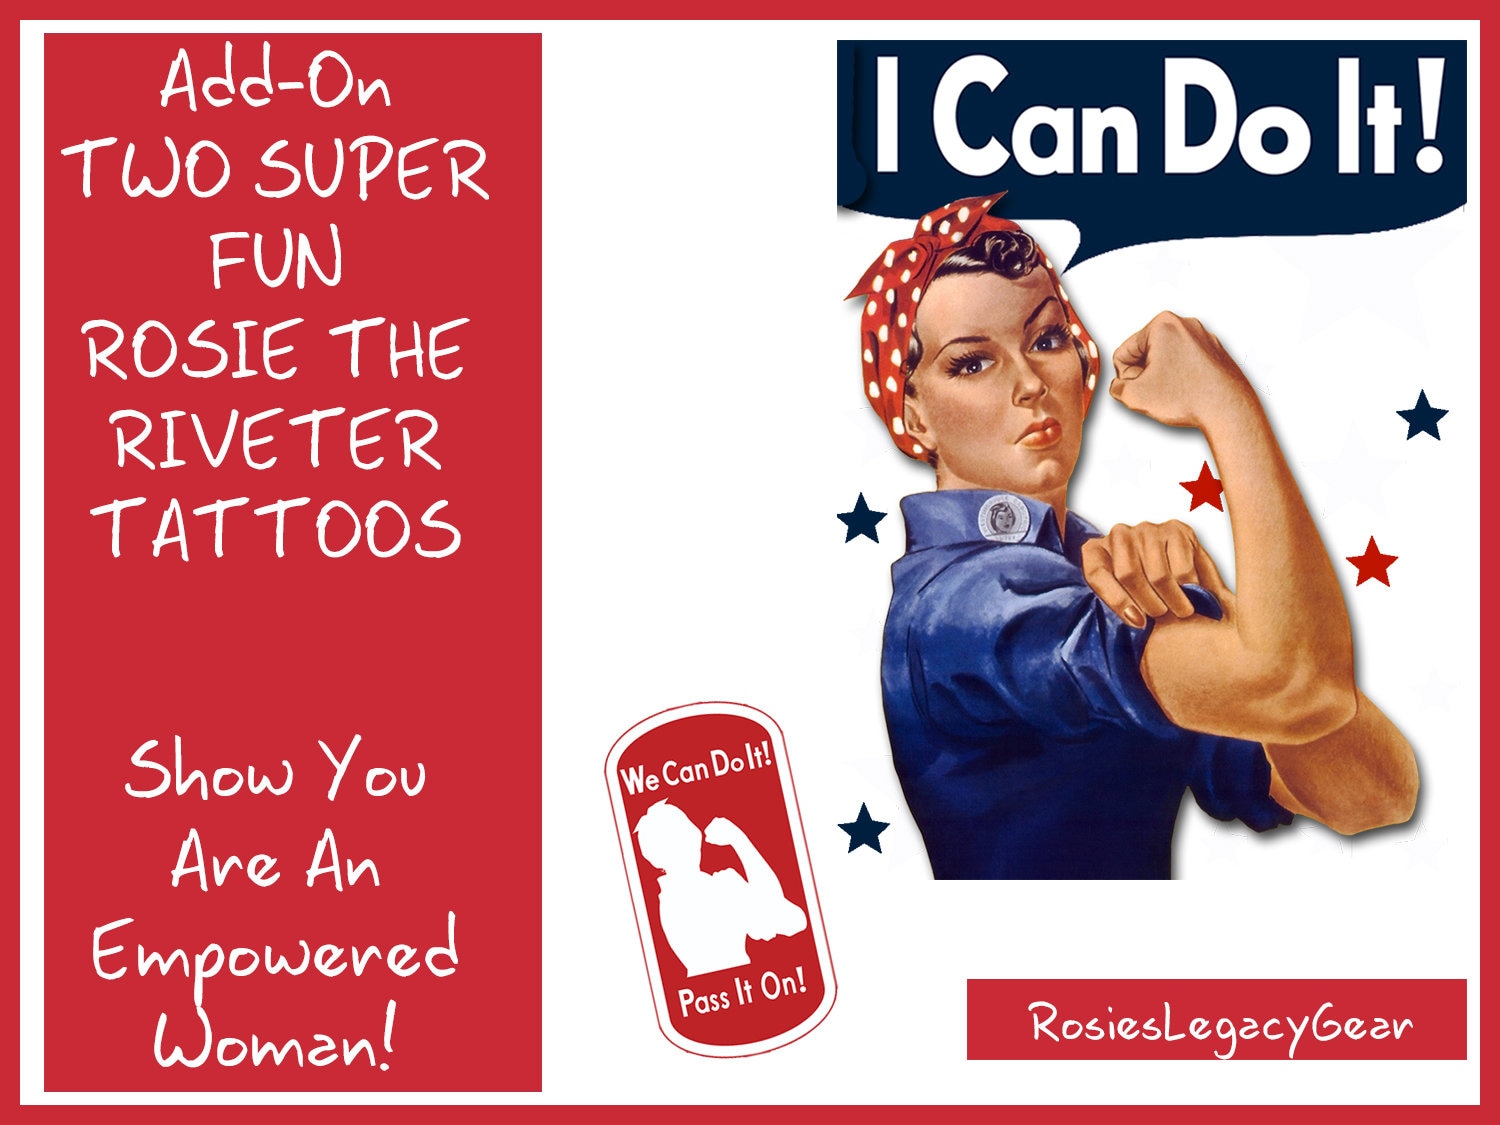 We Can Do It 25mm 1" Pin Badge Rosie Riveter Vintage Feminist Retro WW2 